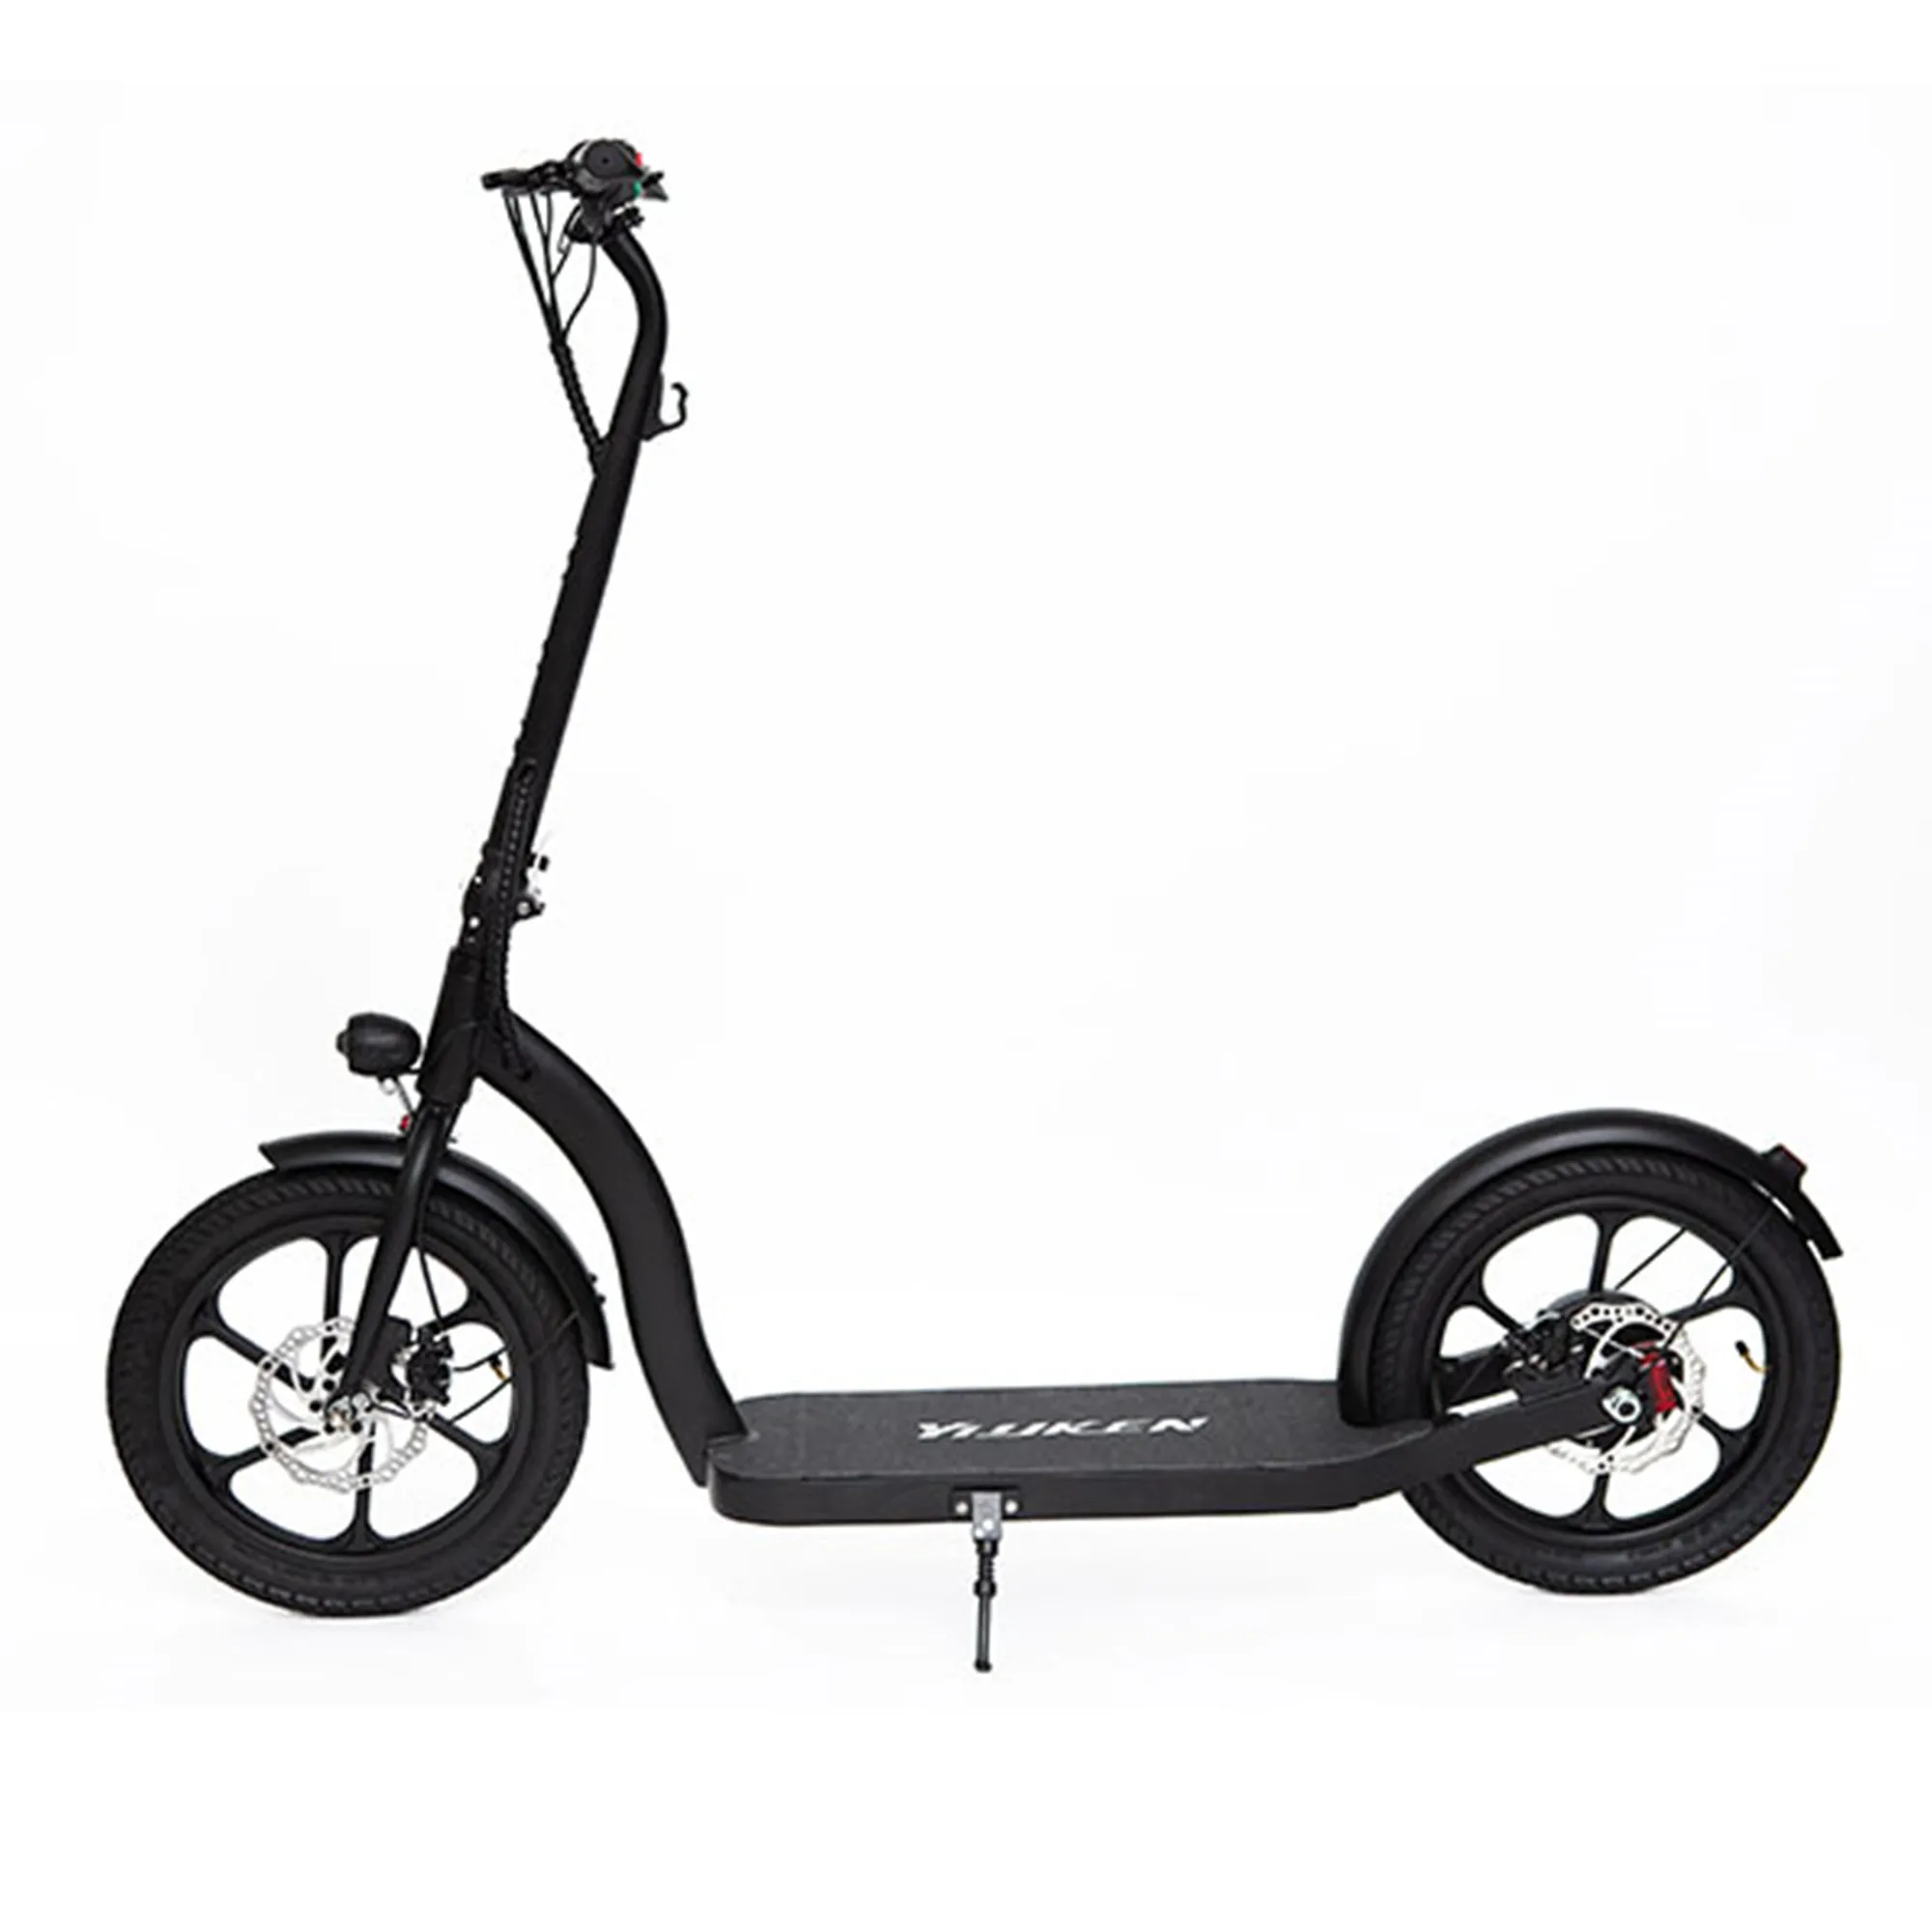 

2021 NEW City Work 16 inch 350W Brushless Motor Full Suspension 36V 10Ah Electric Scooter